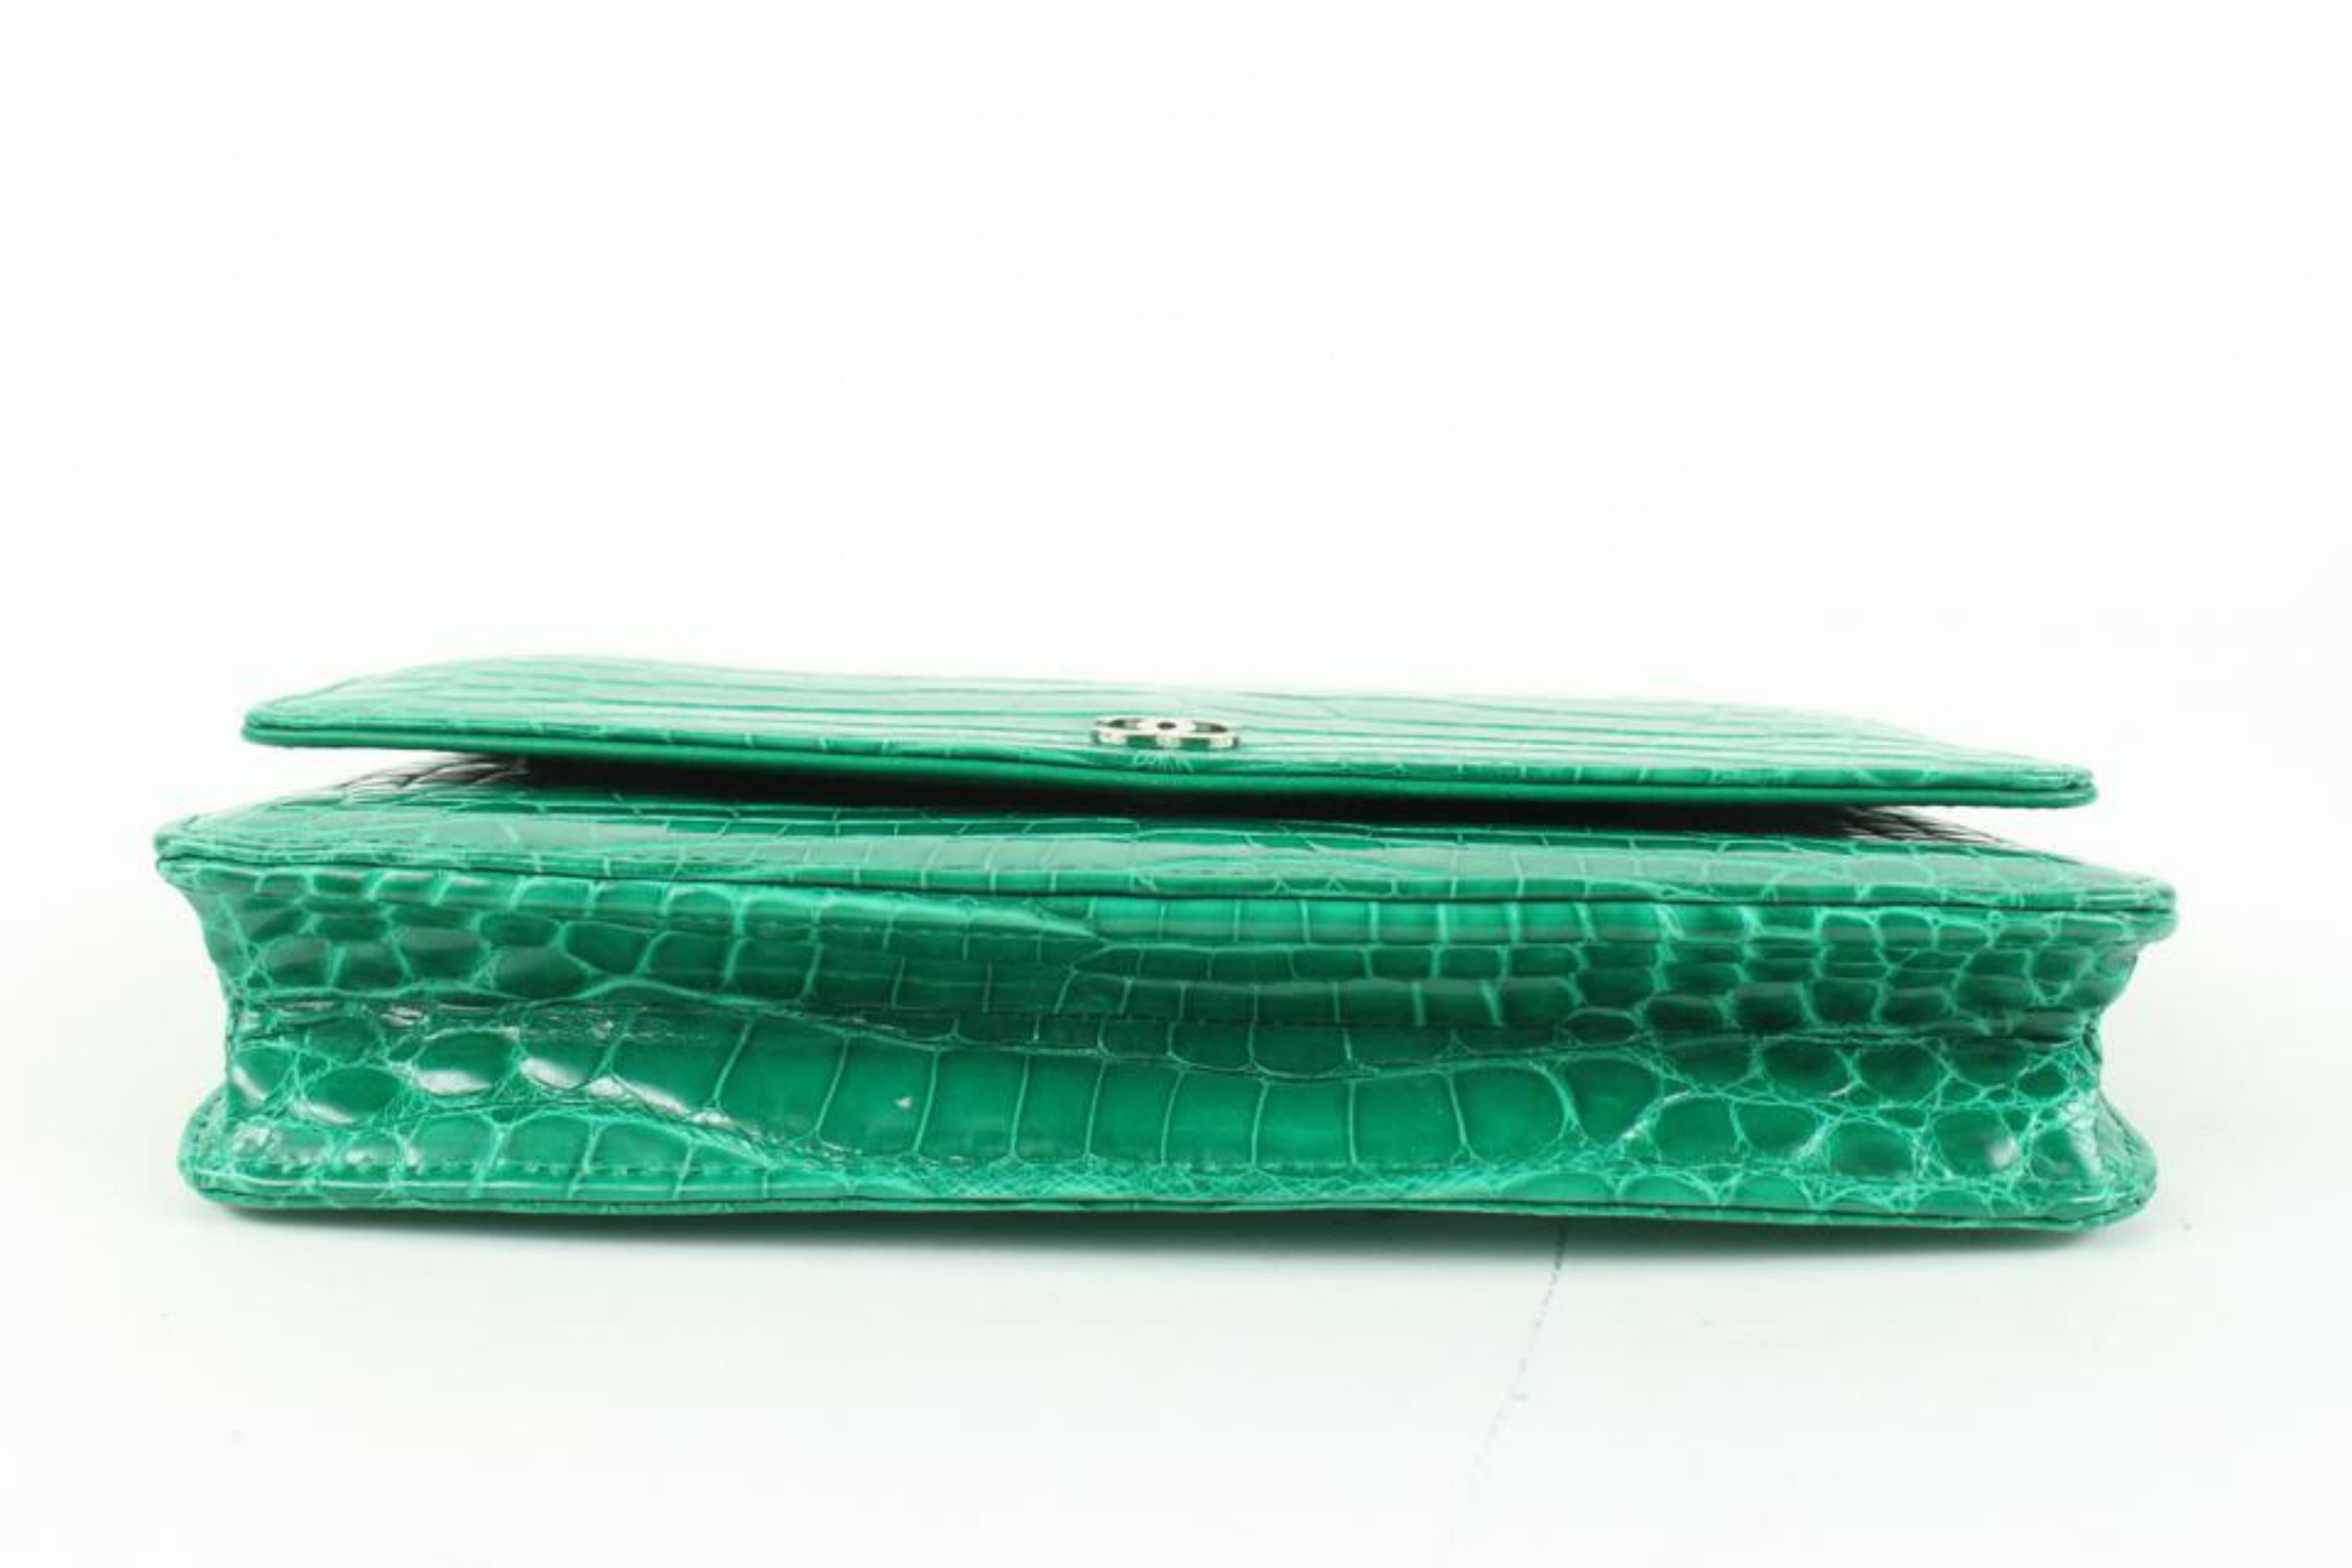 Chanel Ultra Rare Emerald Green Alligator Wallet on Chain SHW WOC 46cz414s For Sale 3